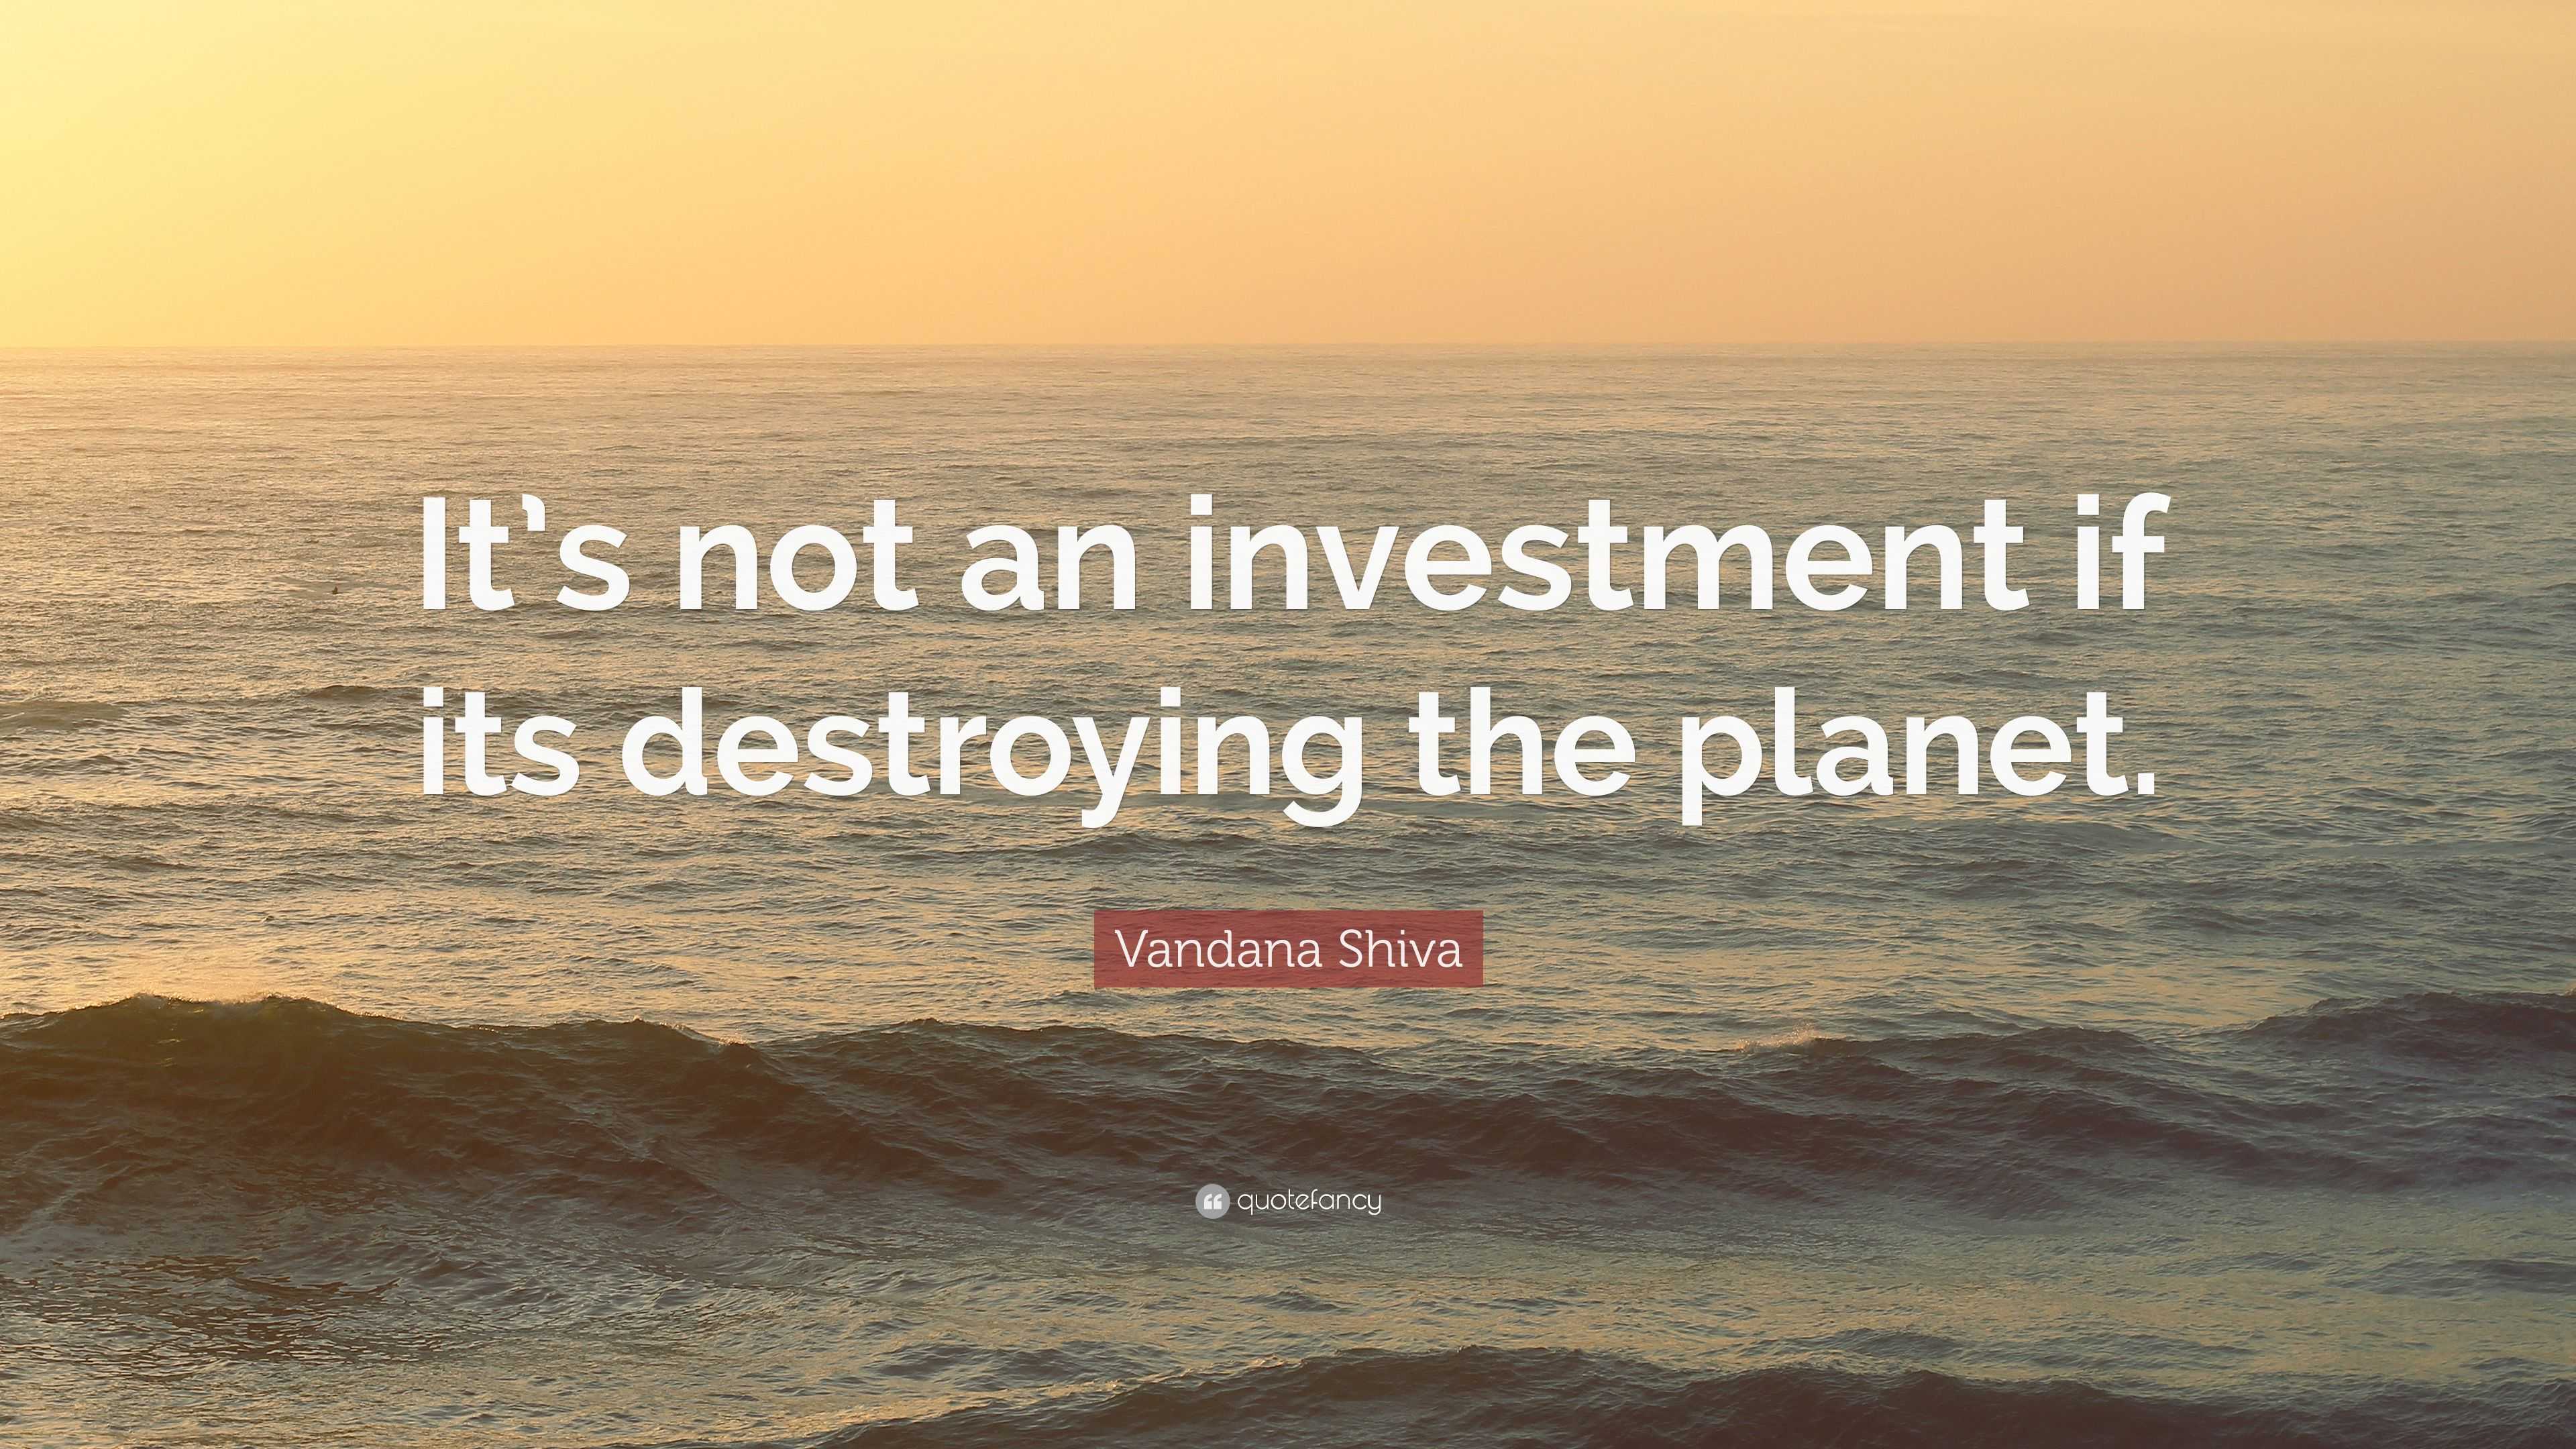 Vandana Shiva Quote: “It’s not an investment if its destroying the planet.”